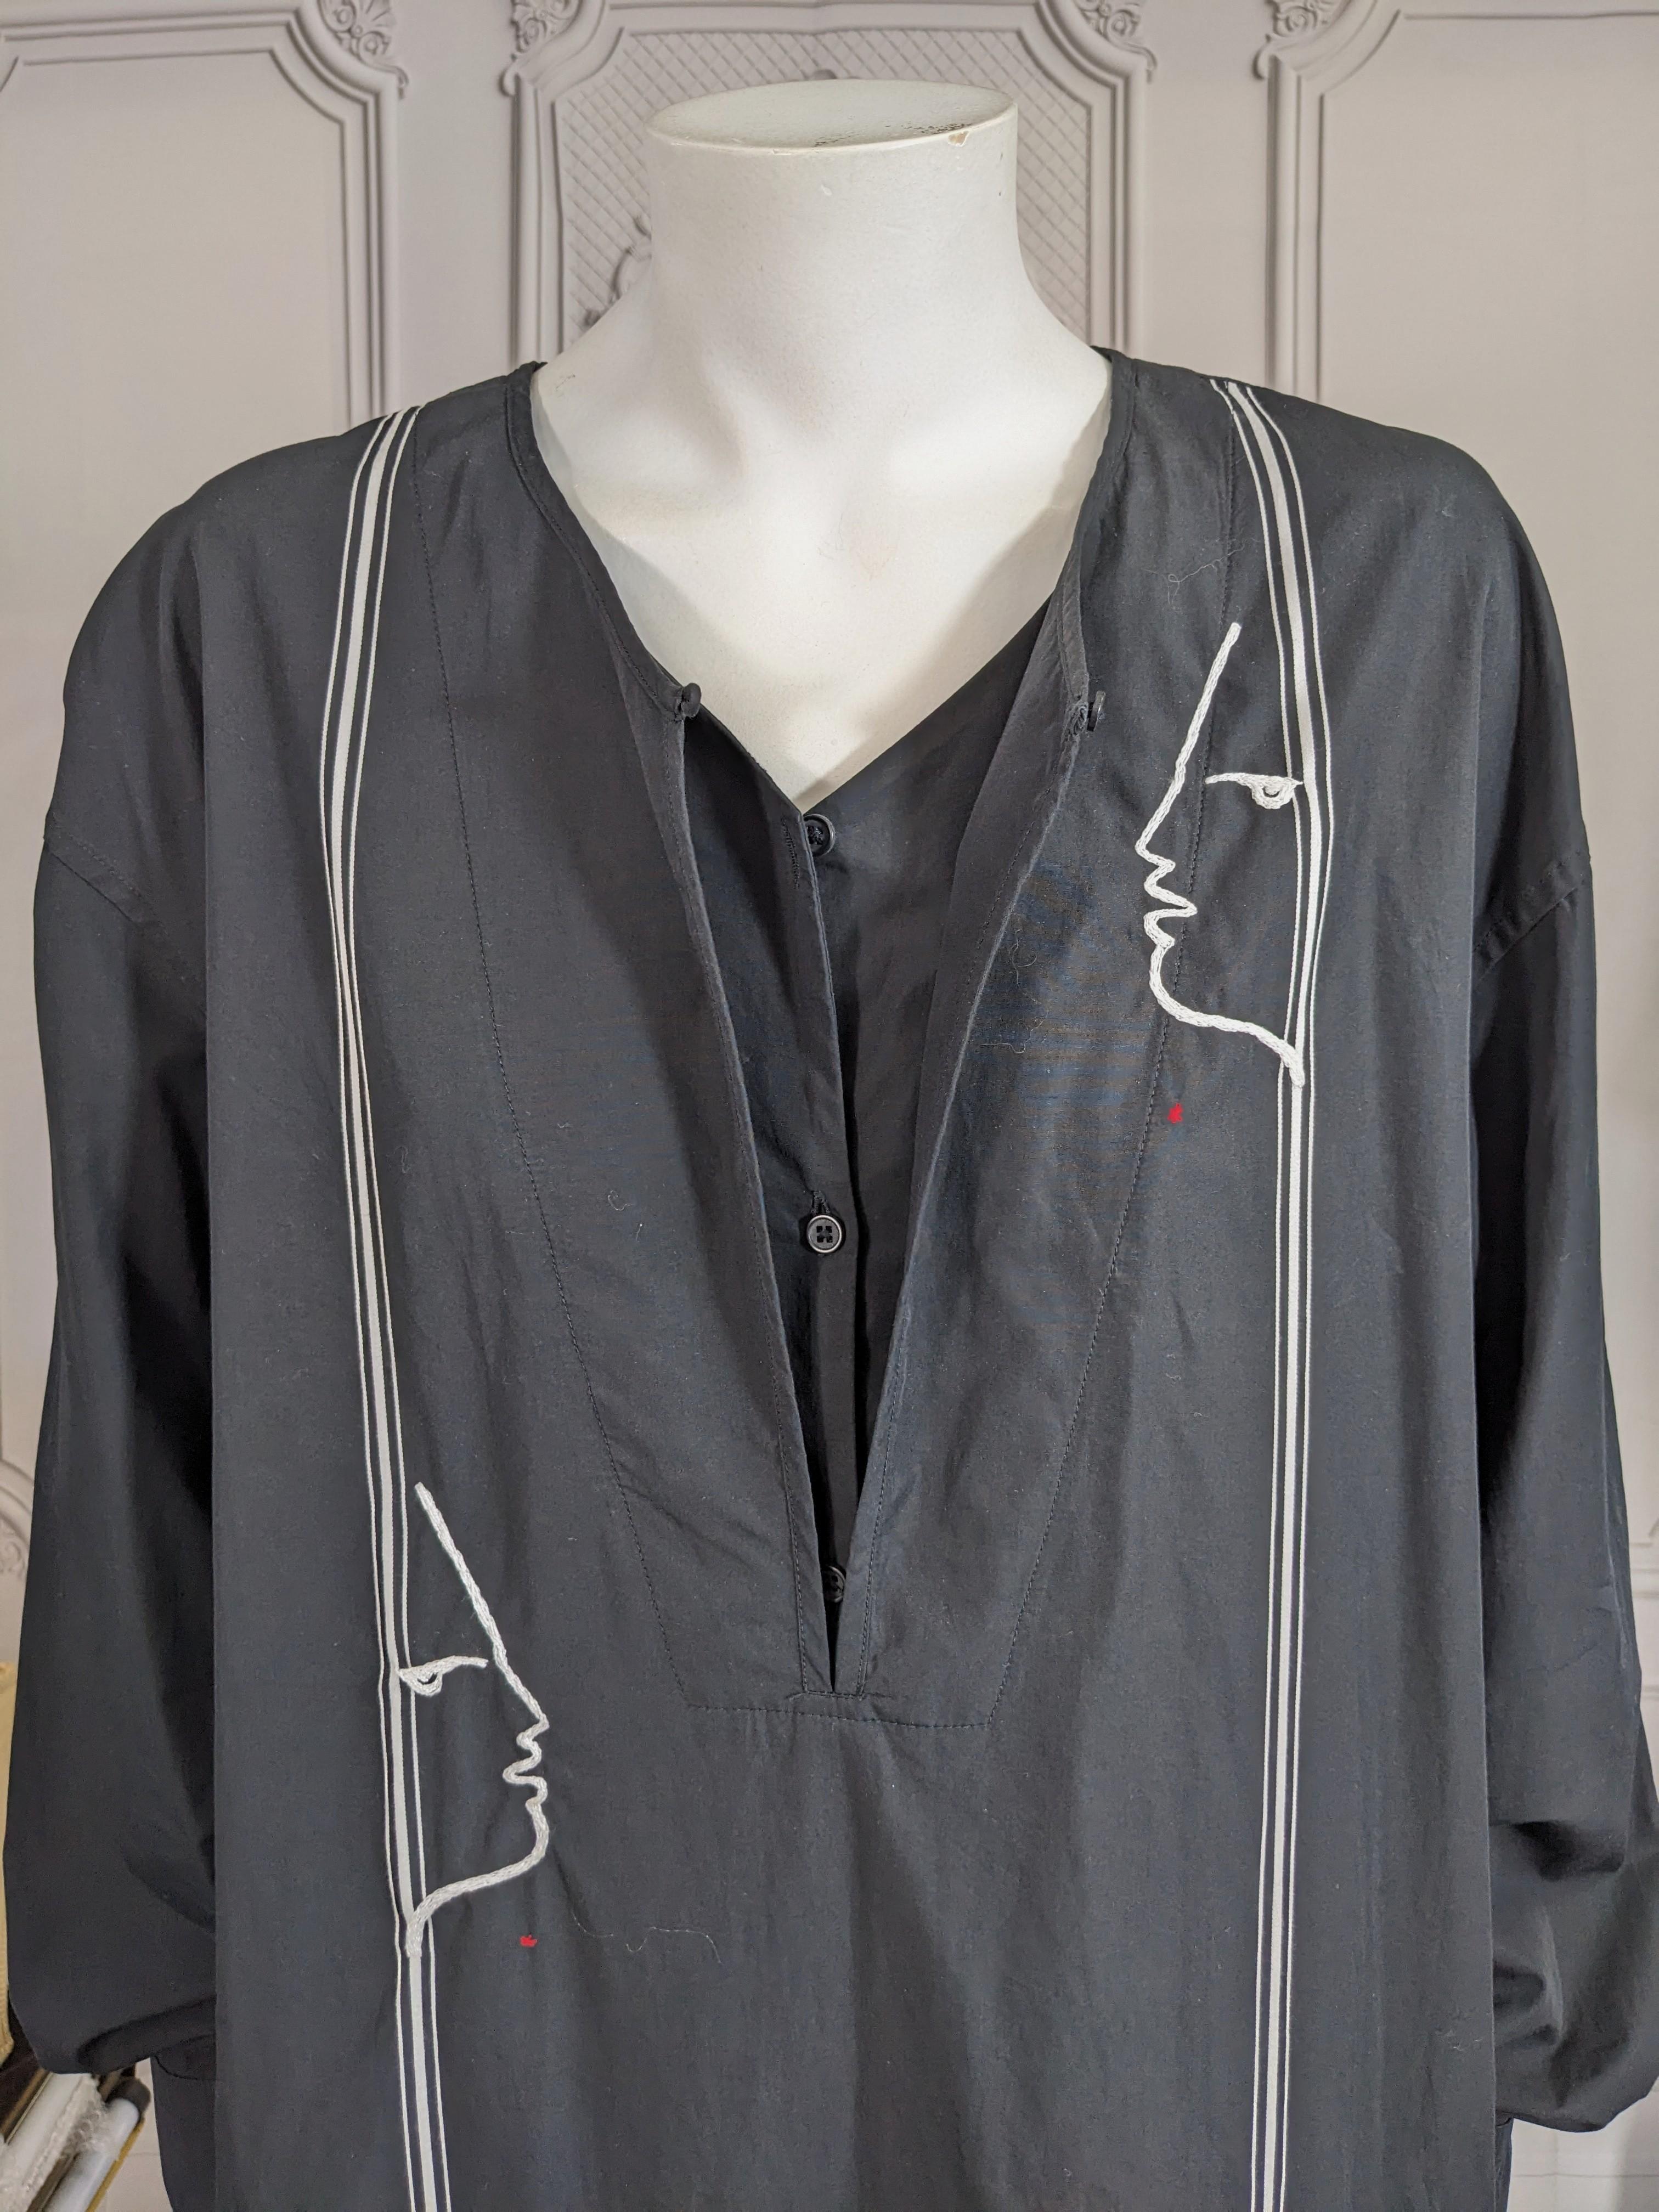 Upcycled Shirt Dress, Jean Cocteau, Studio VL In Good Condition For Sale In New York, NY